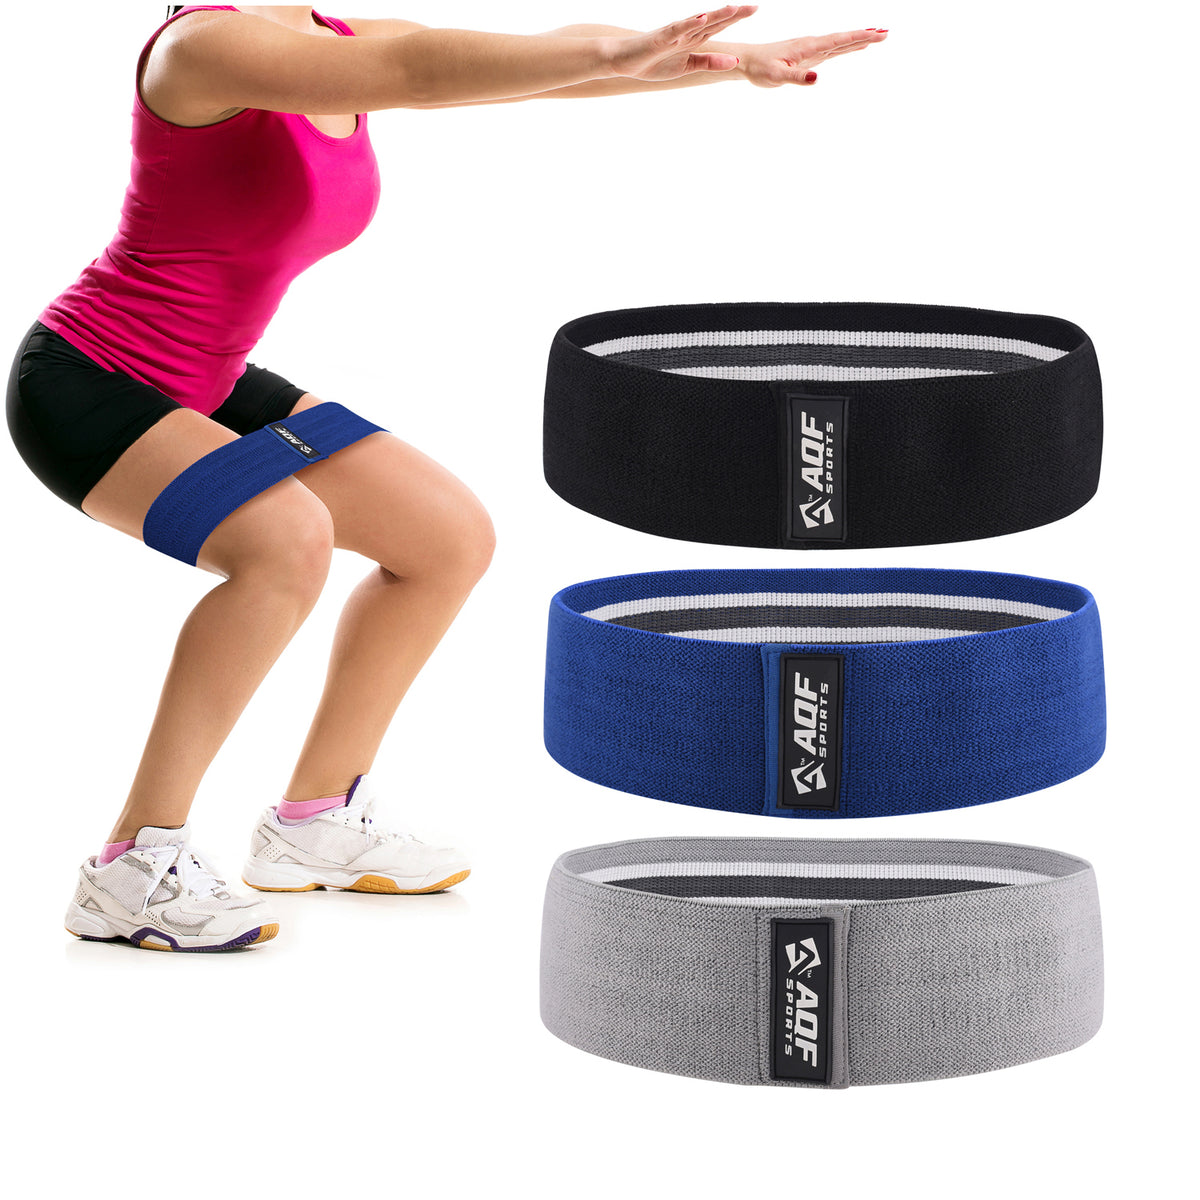 AQF Hip Resistance Bands, Pack of 3 - Sculpt and Tone Your Body